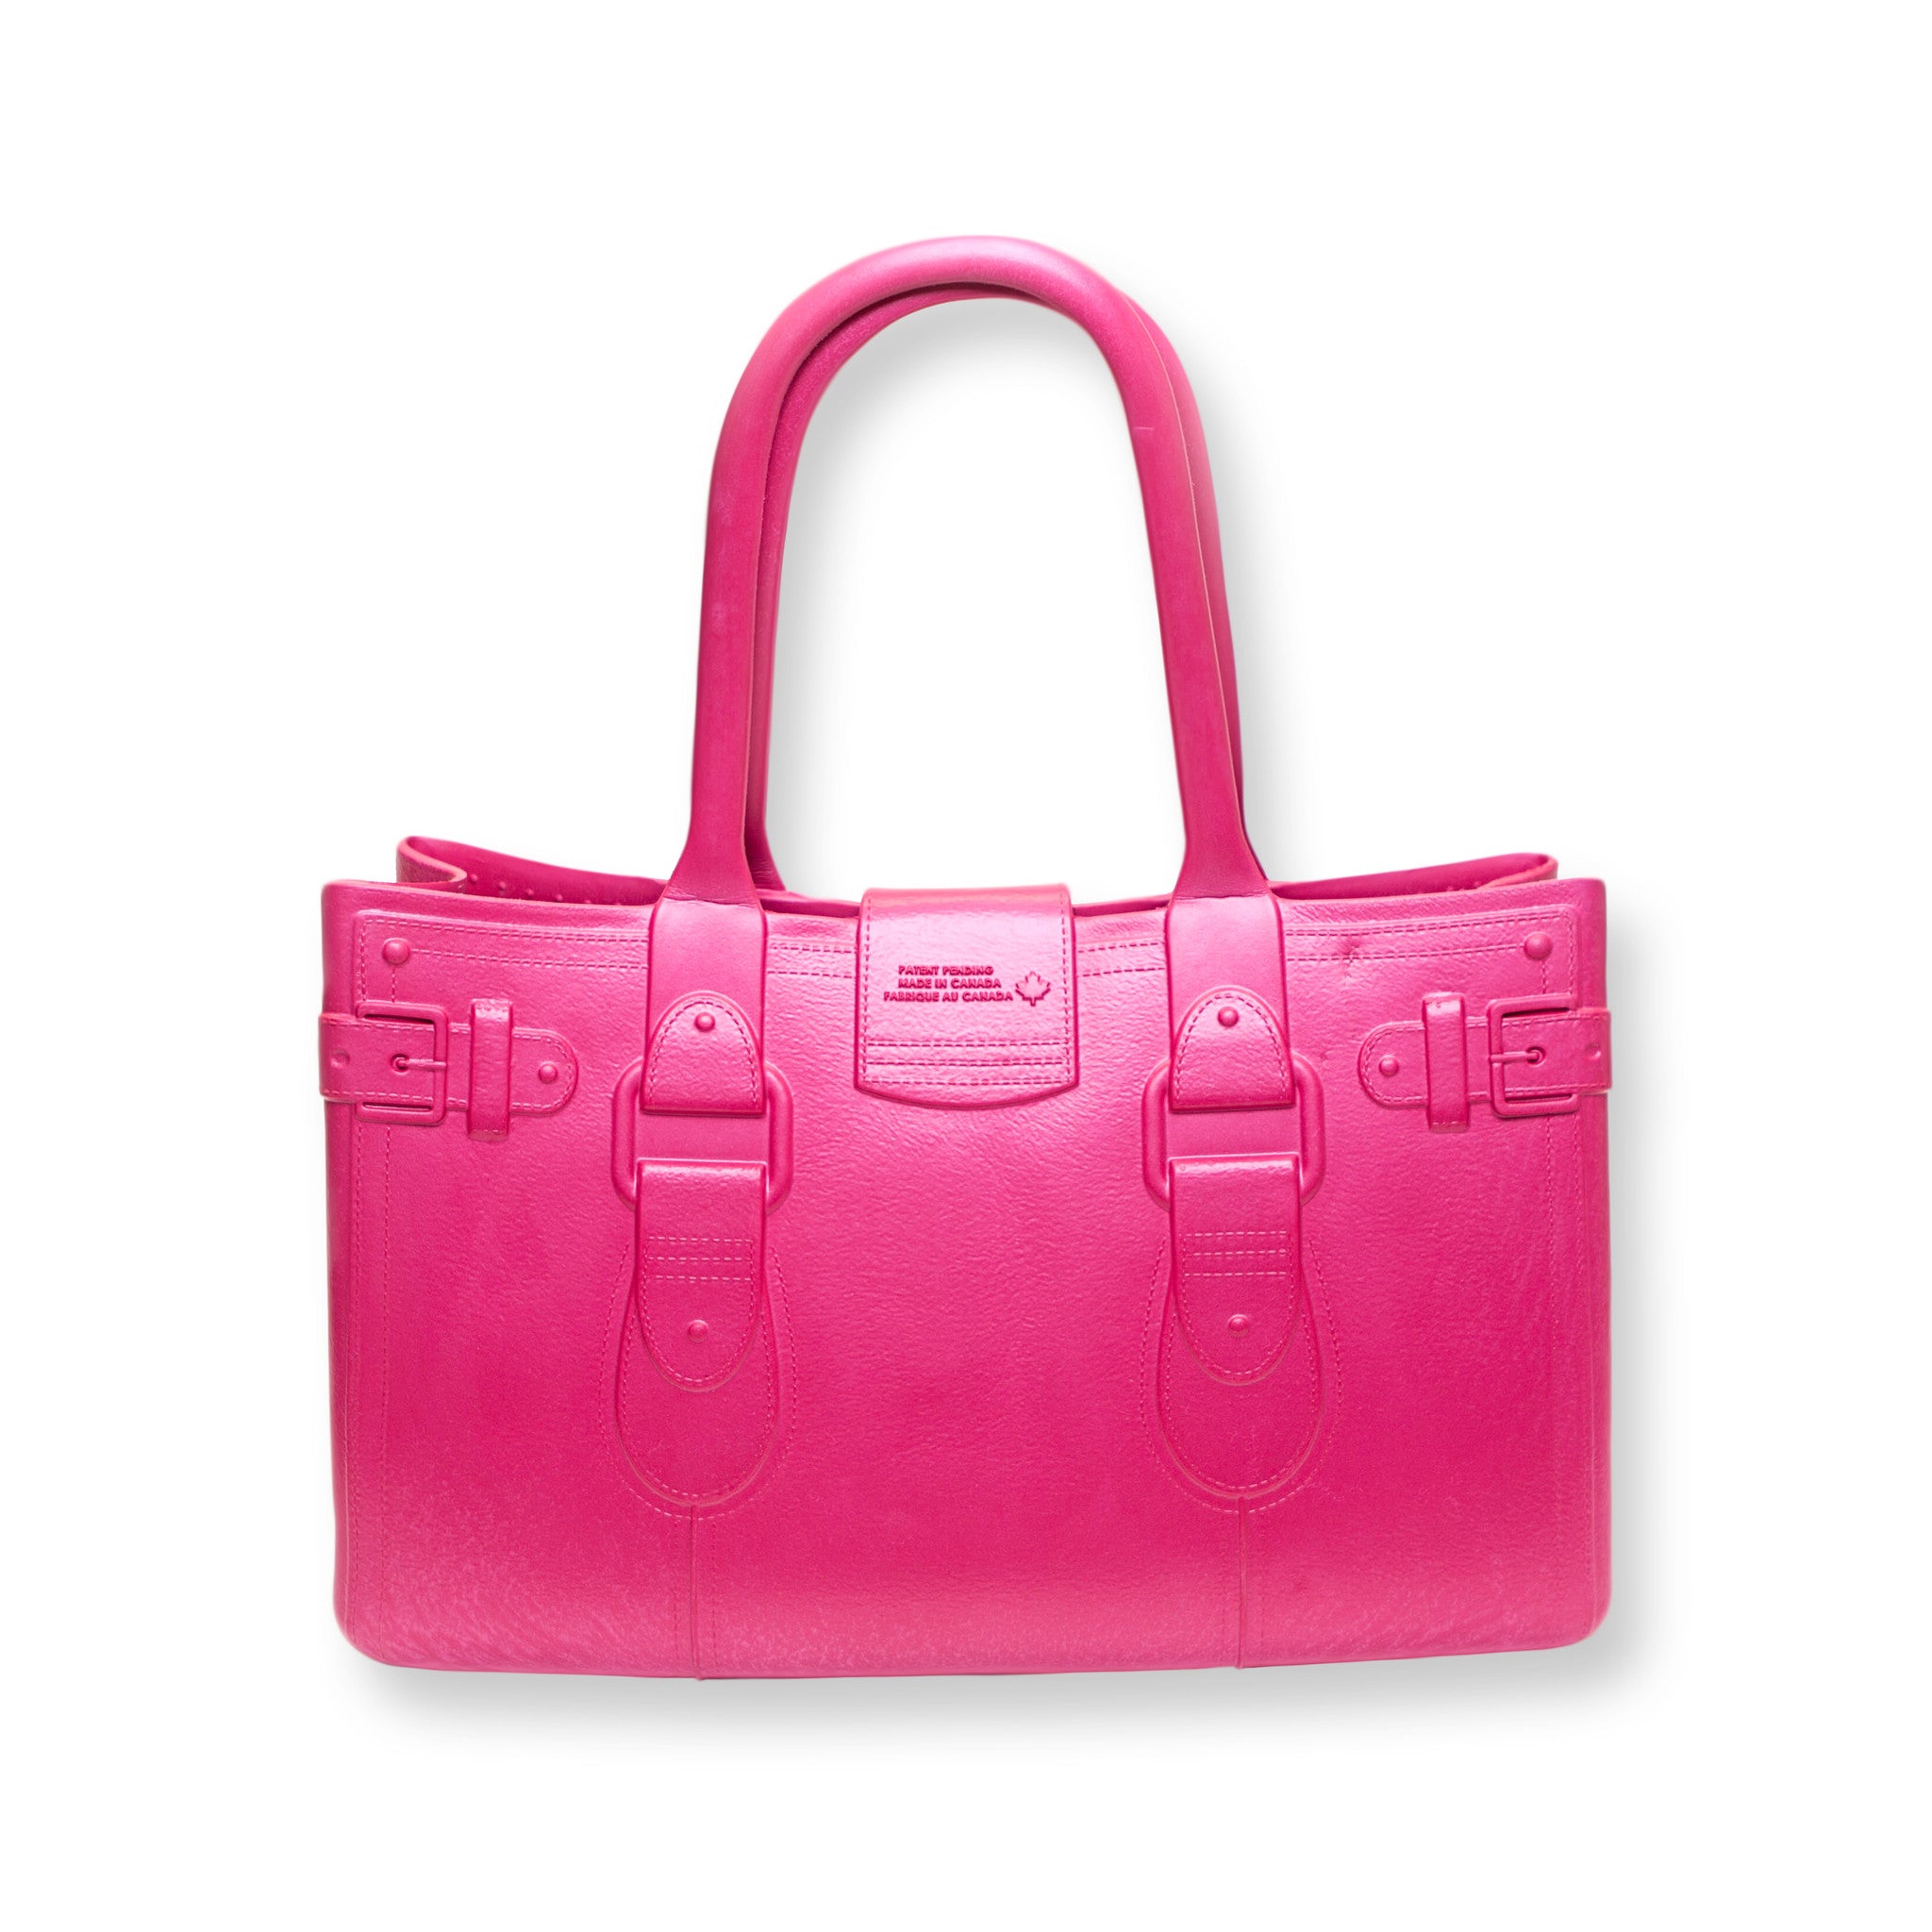 Model M. Tourmaline (pink) from Great Bag Co. #GreatBag – GREAT BAG CO ...